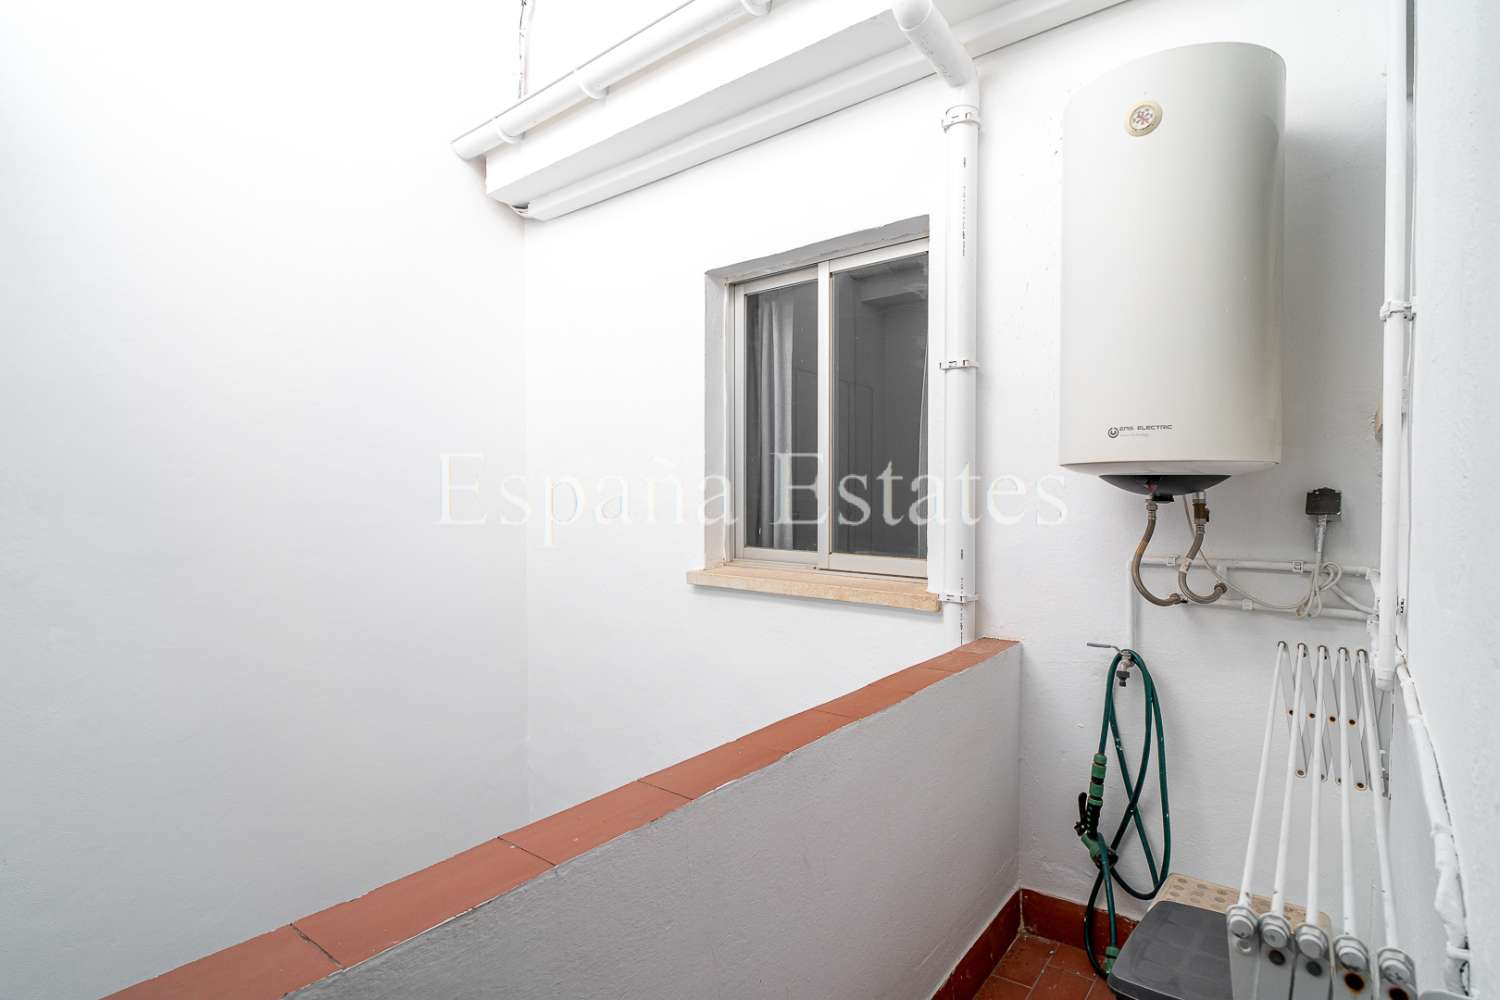 Apartment in Nerja with roof terrace!